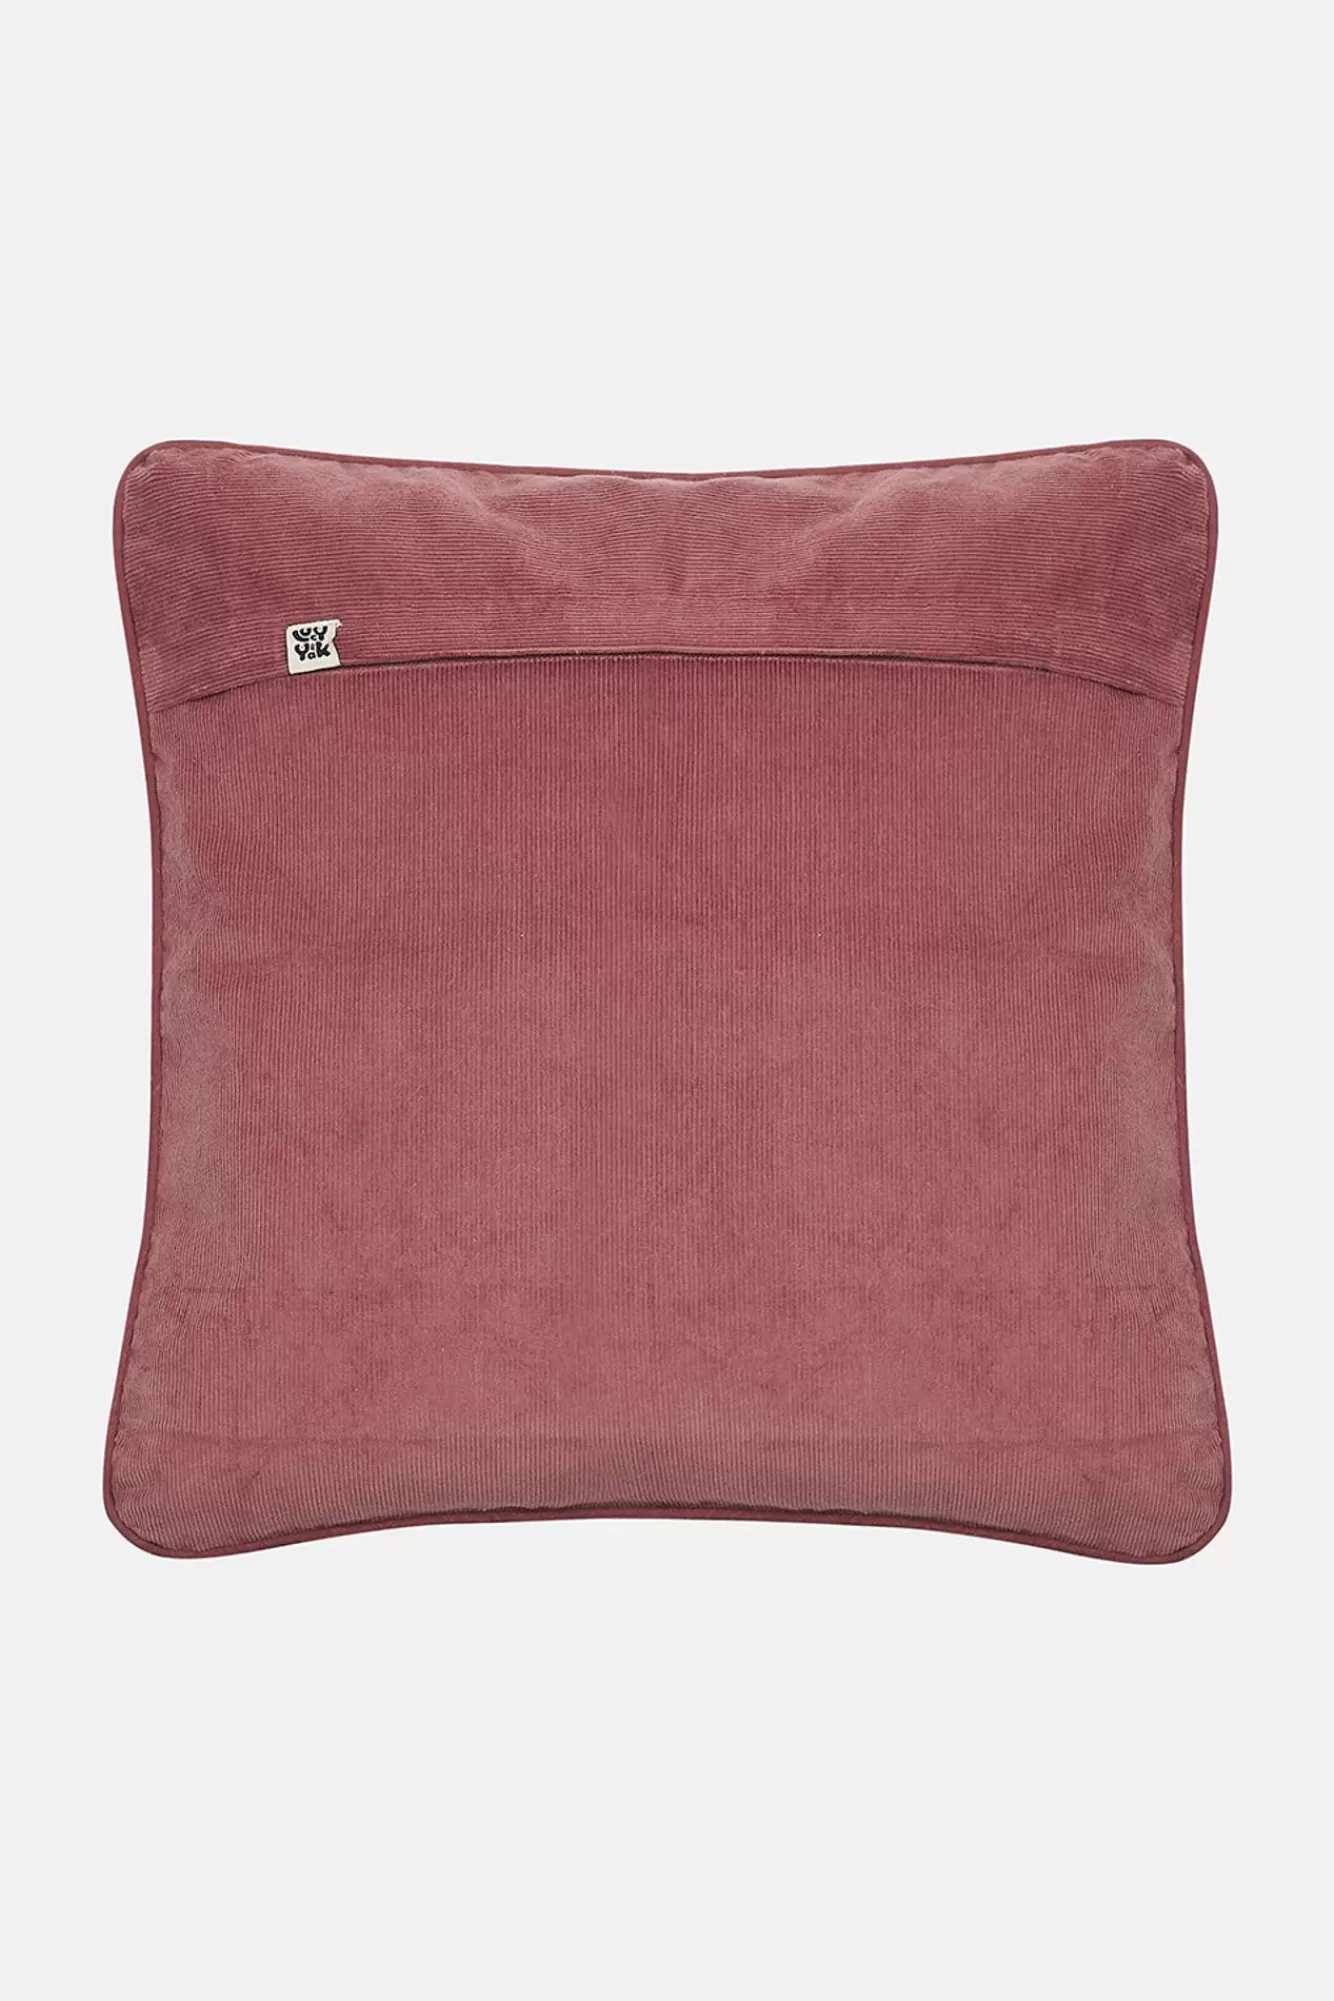 Cushion Cover: Deadstock Fabric - Ash Pink Cord-Lucy & Yak Discount